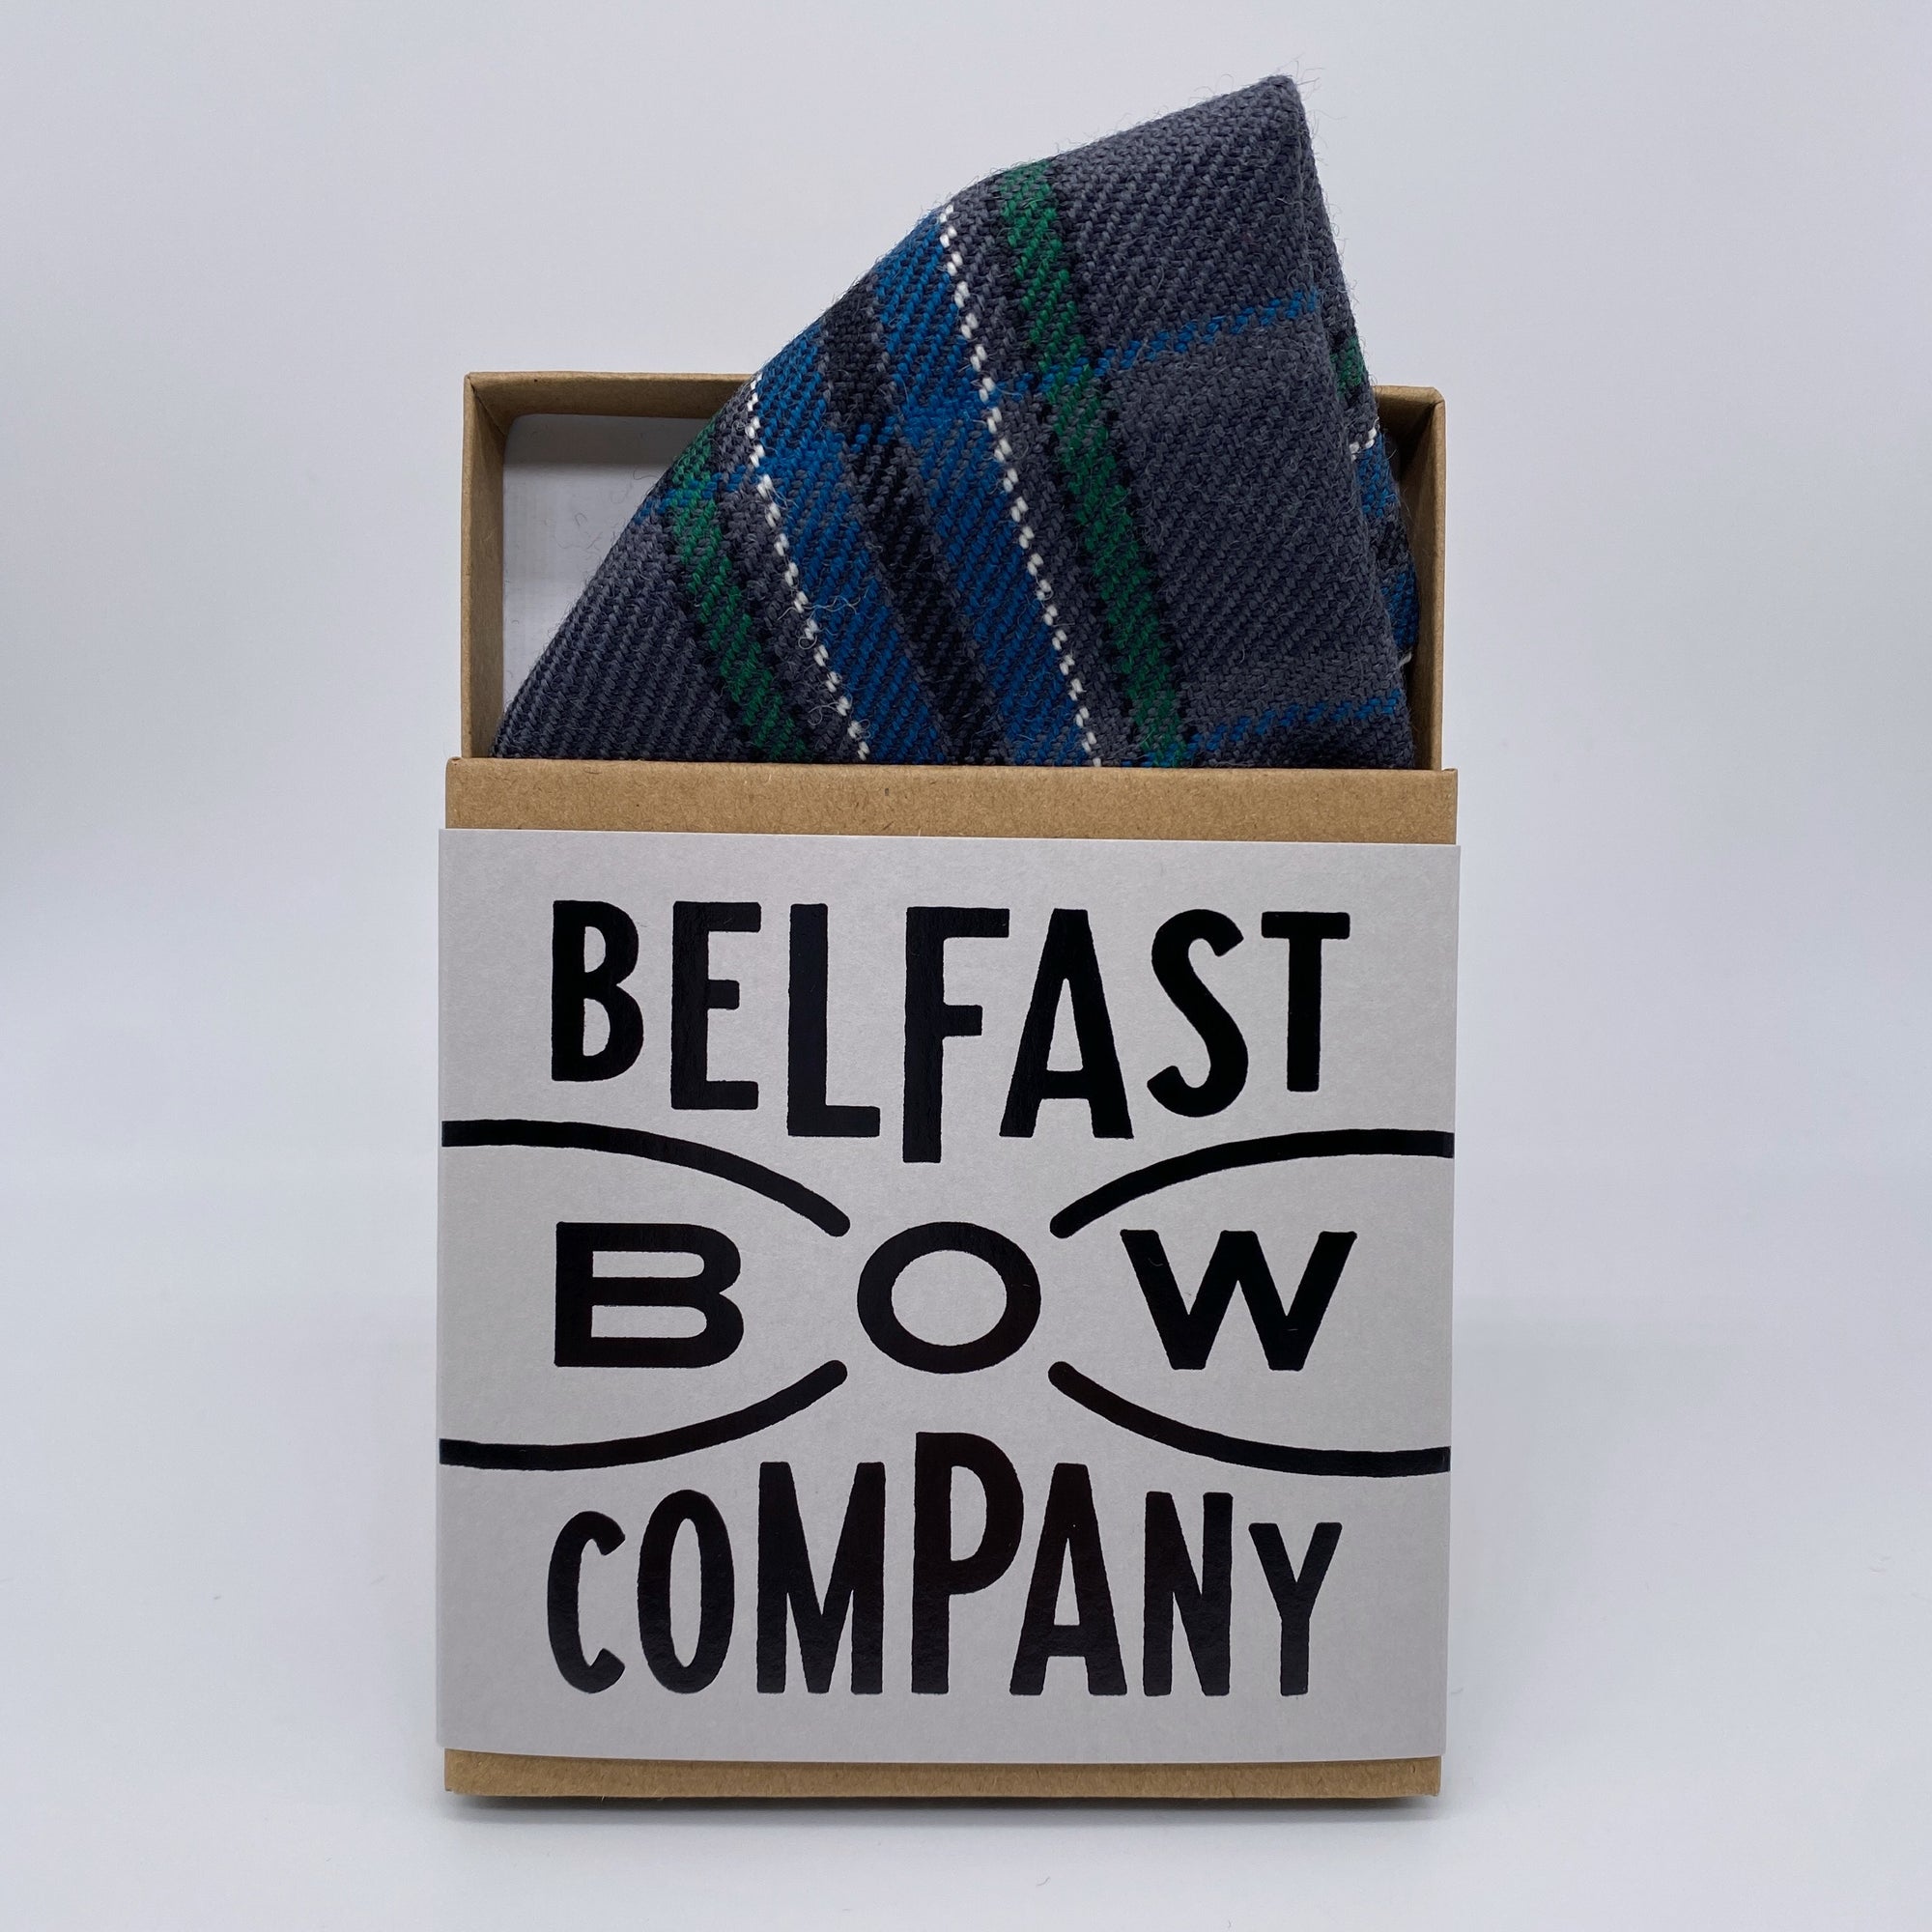 Giant's Causeway Tartan Pocket Square by the Belfast Bow Company